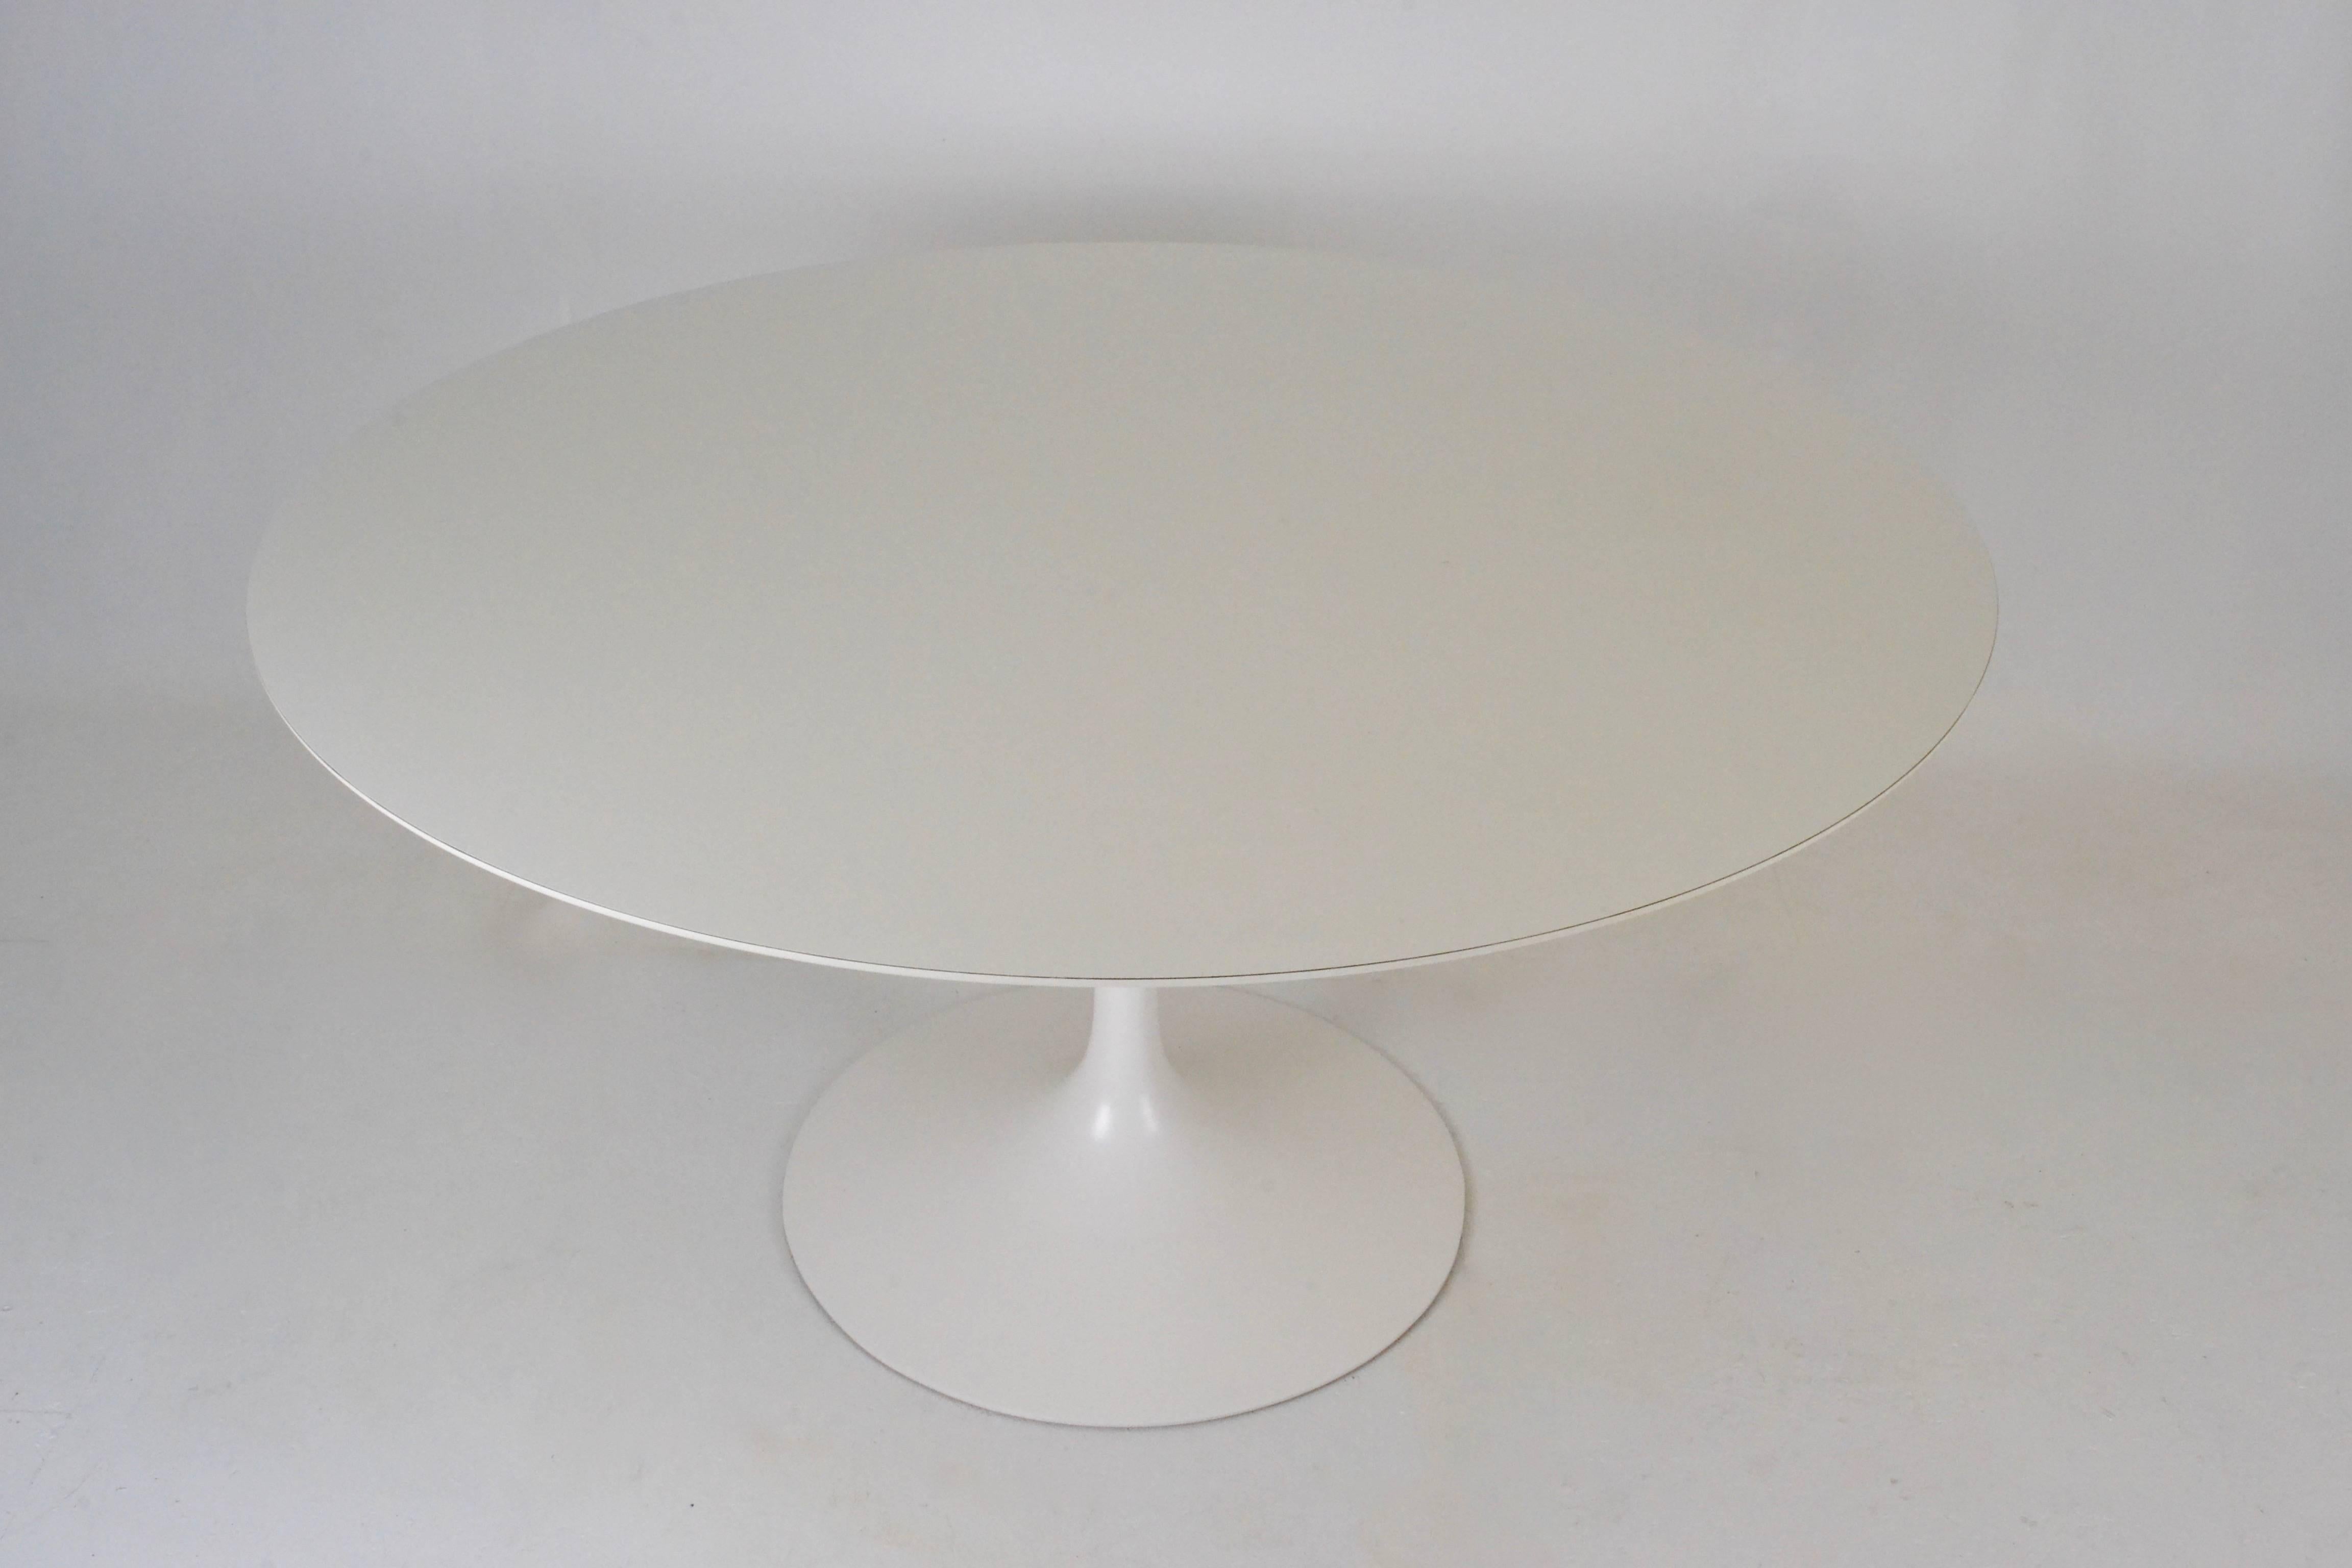 A very nice example of an early Saarinen table. Great size at 54". Base has been restored to excellent condition. Original laminate top is very, very clean with almost no wear.